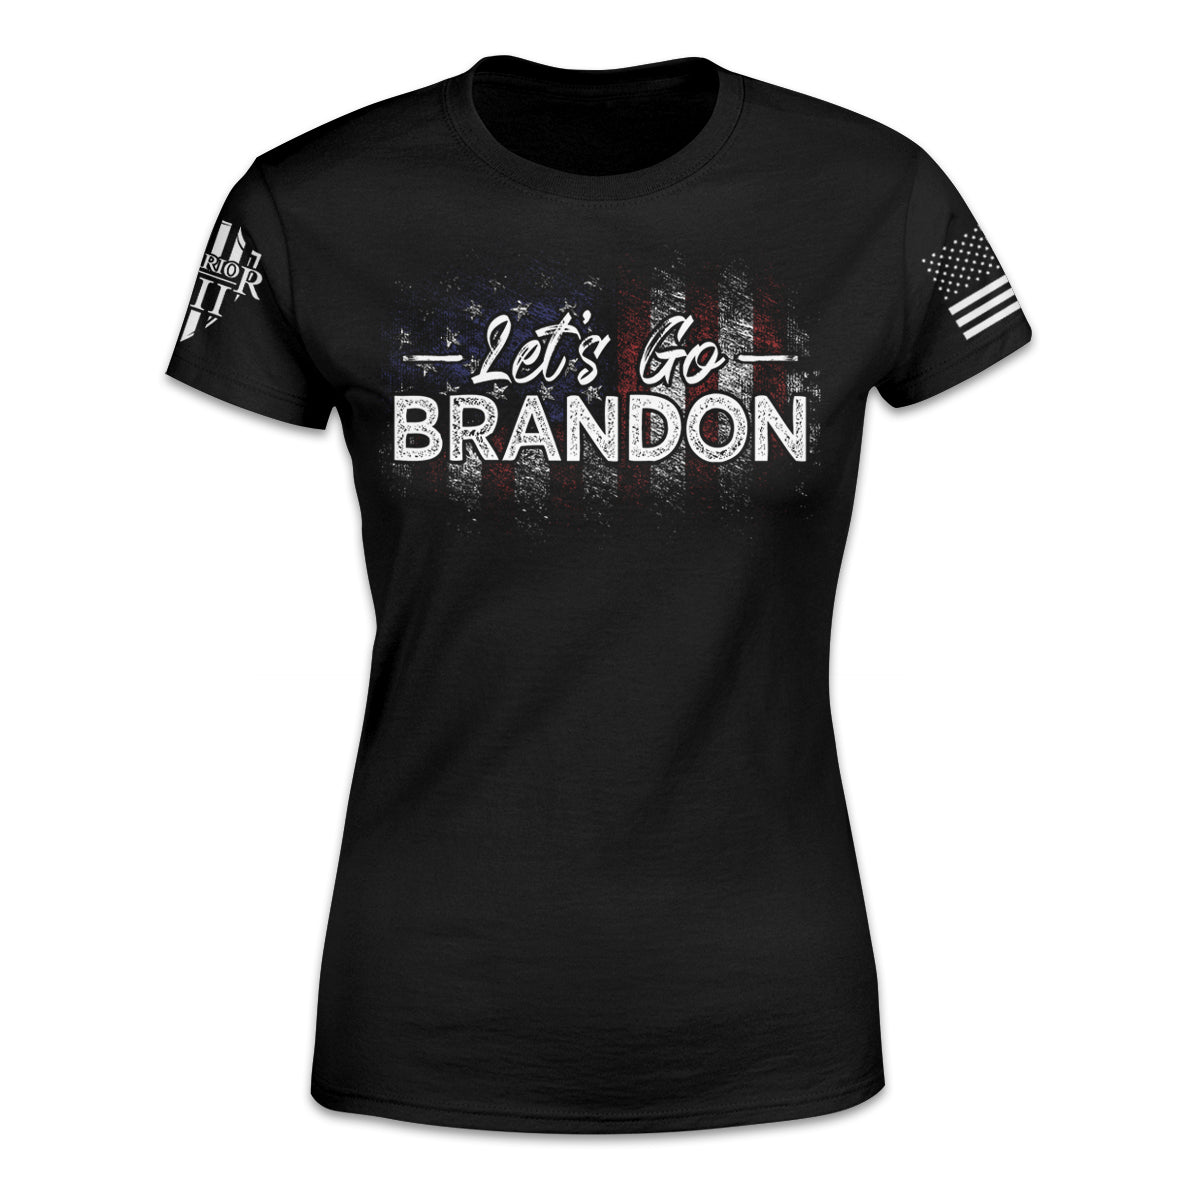 Let's Go Brandon - Women's Relaxed Fit